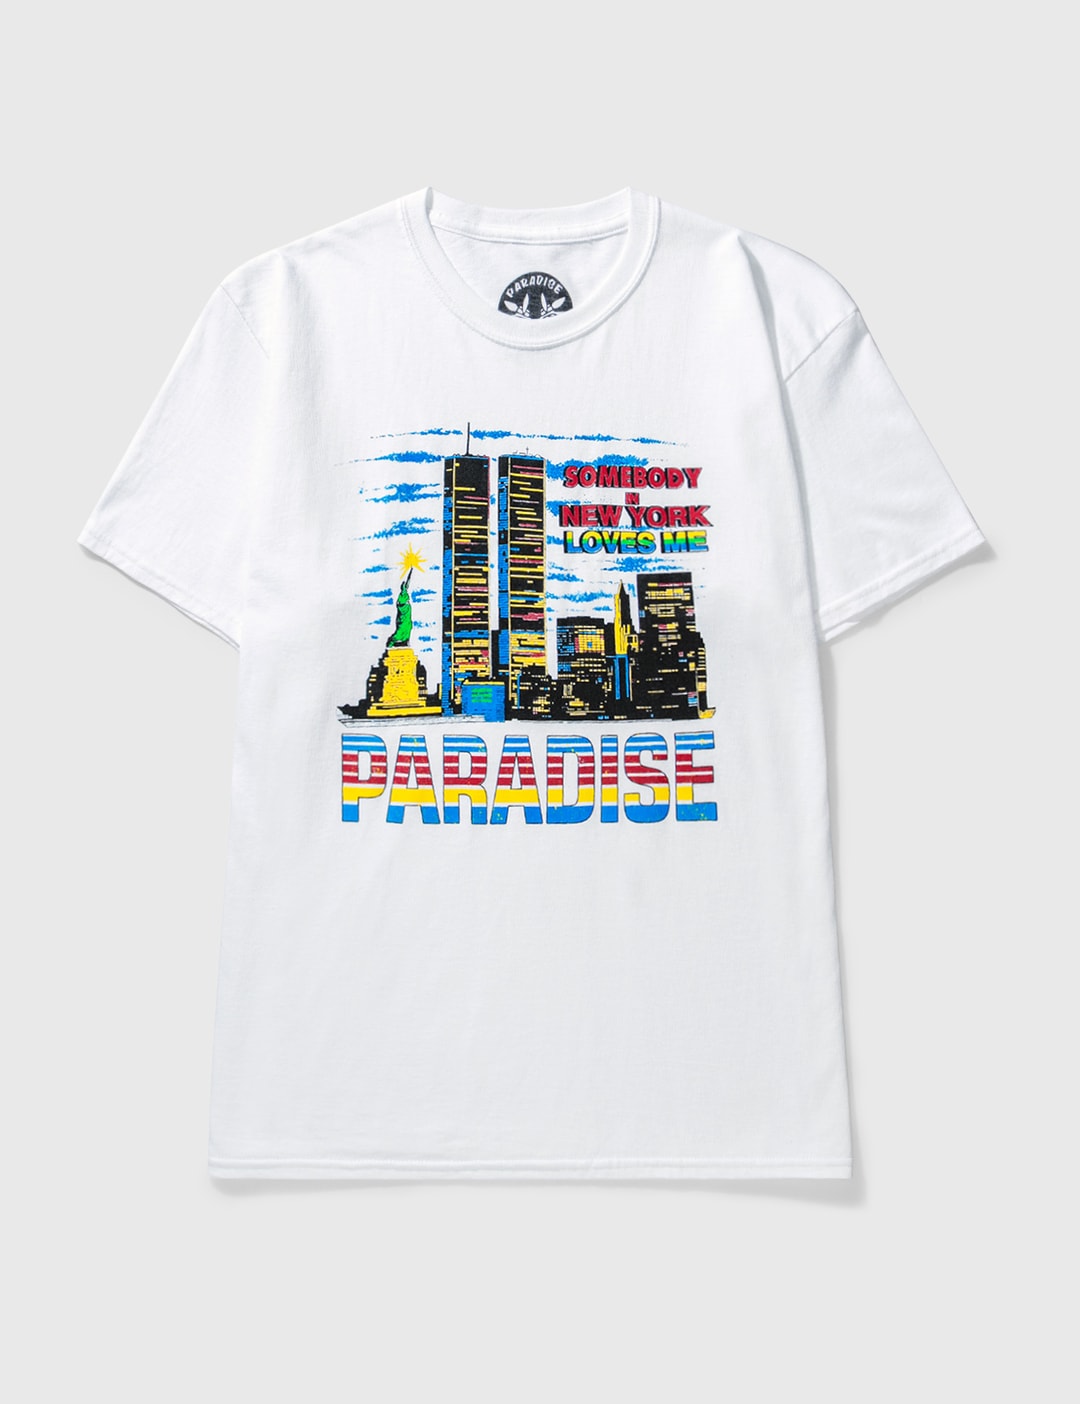 Paradise NYC - Somebody Loves Me T-shirt | HBX - Globally Curated ...